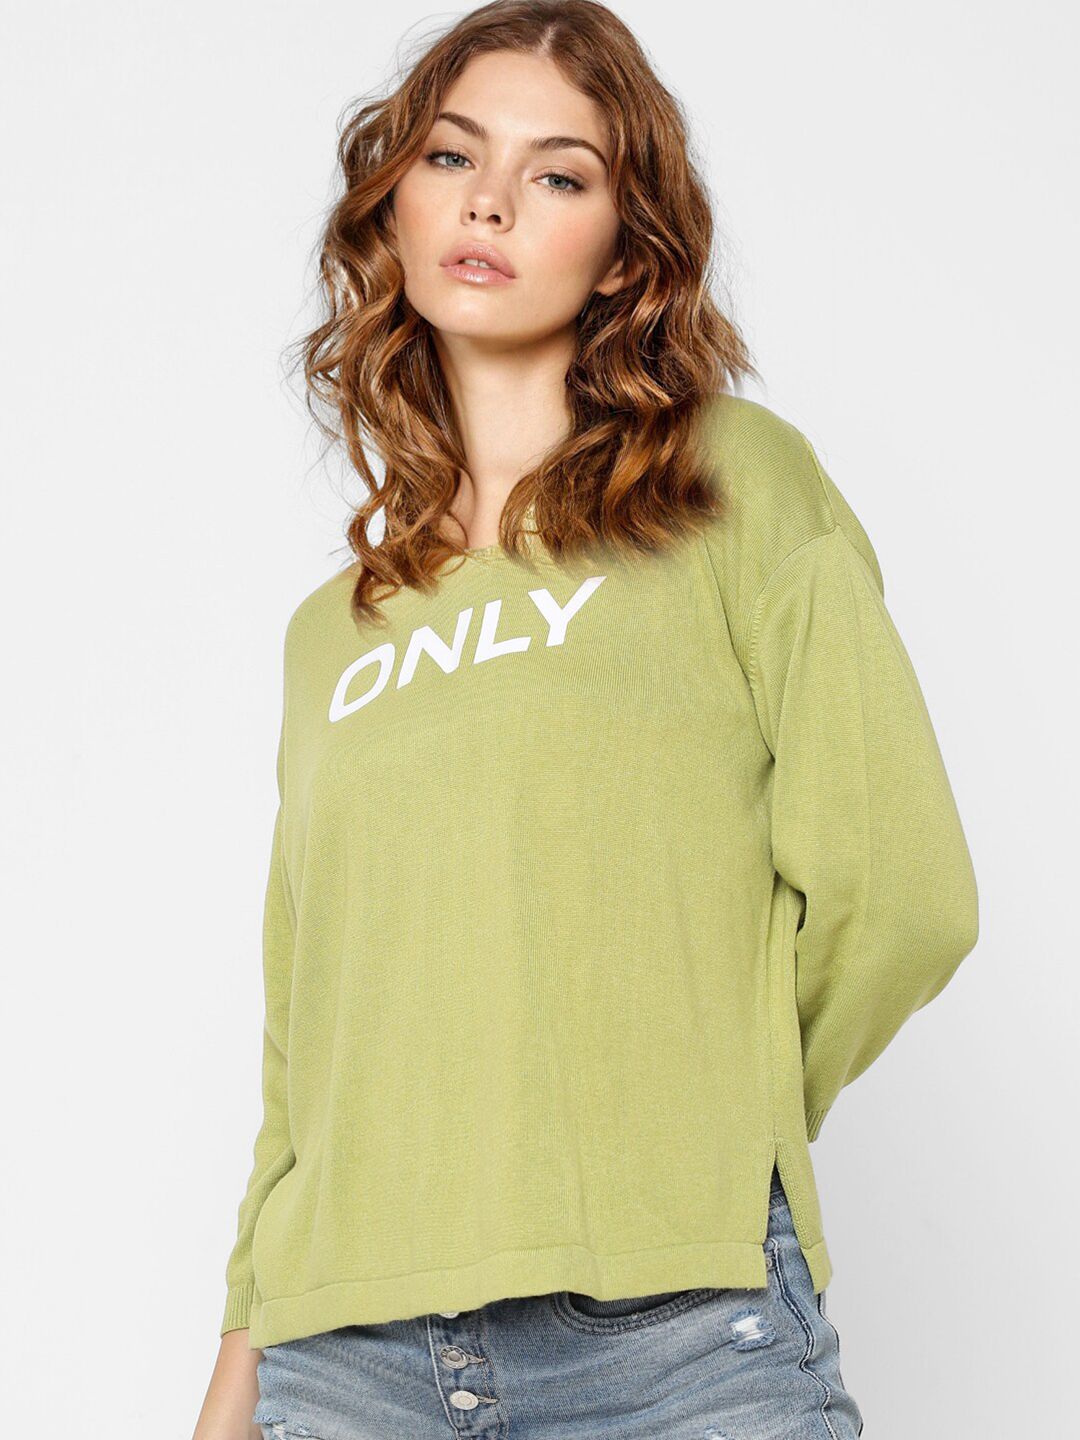 ONLY Women Green Printed Pullover Price in India